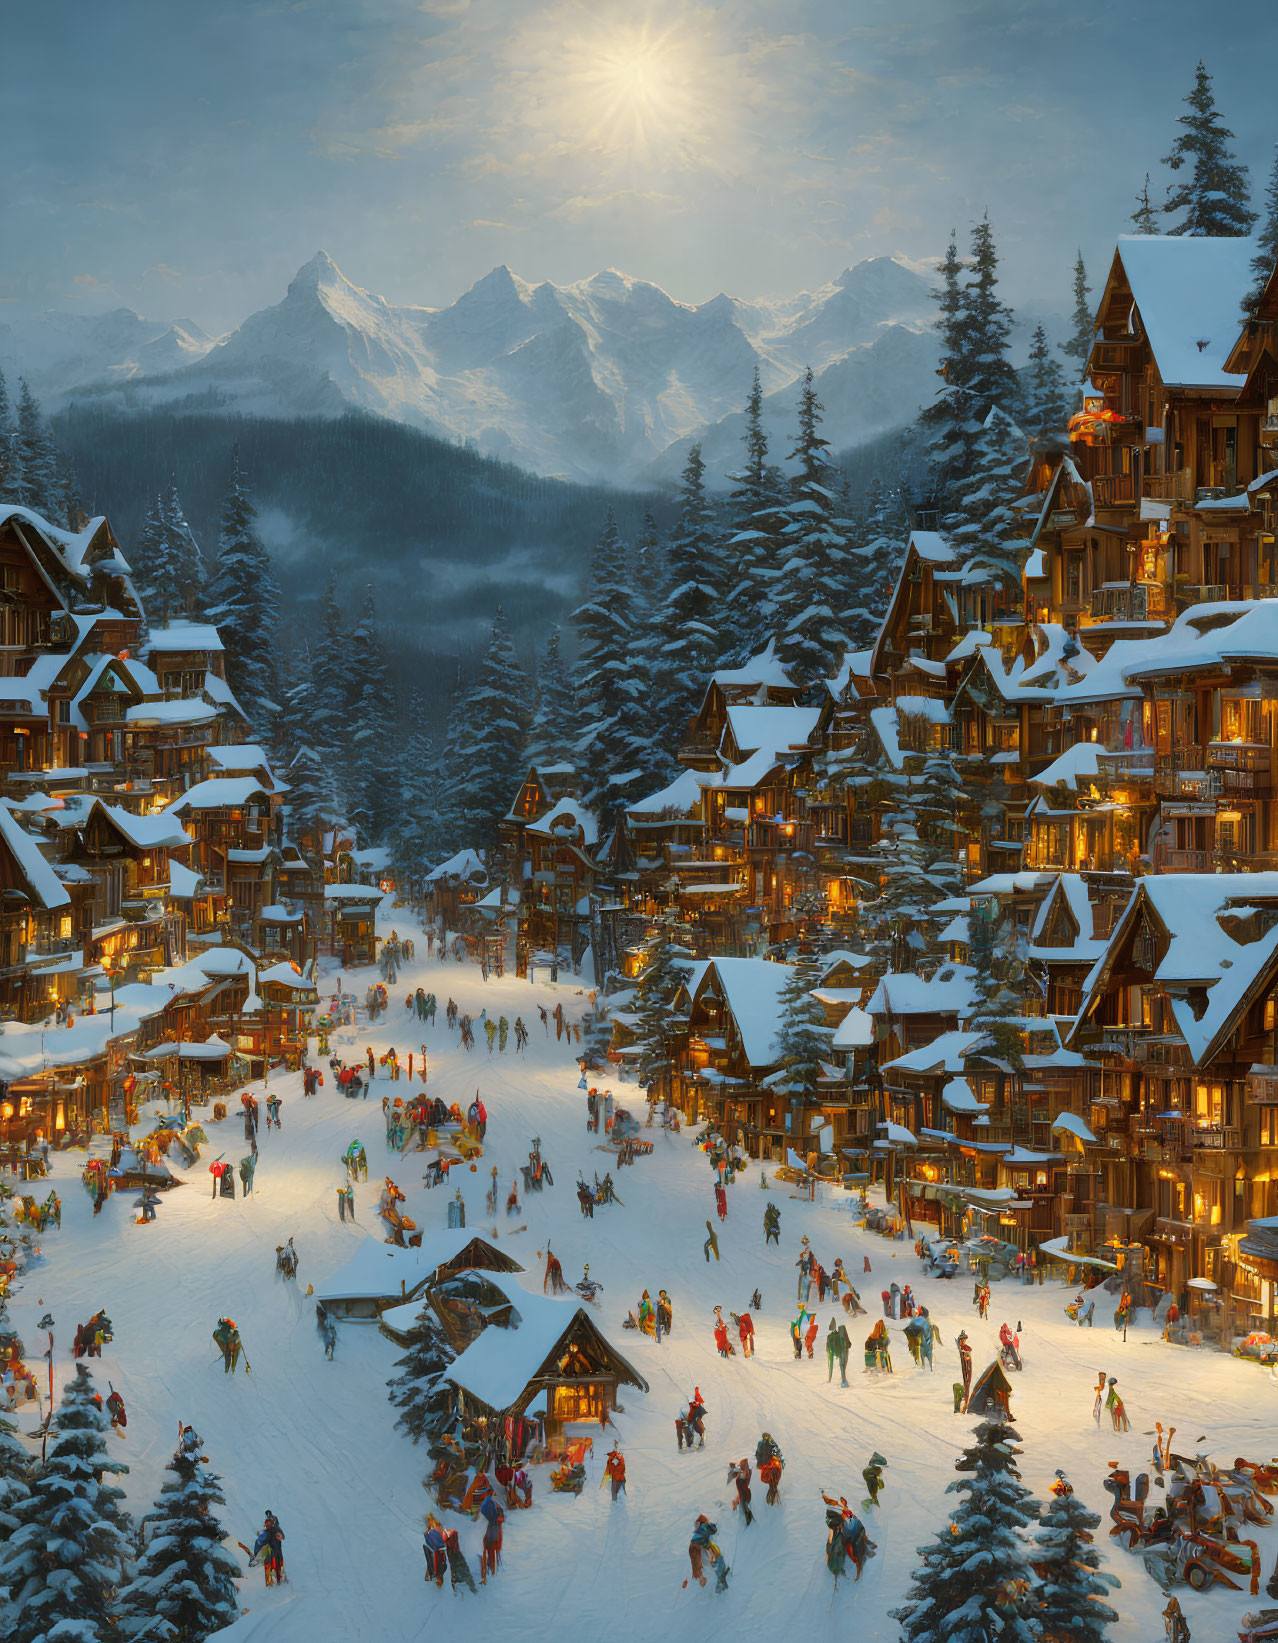 Snow-covered winter village with glowing sunset and mountains.